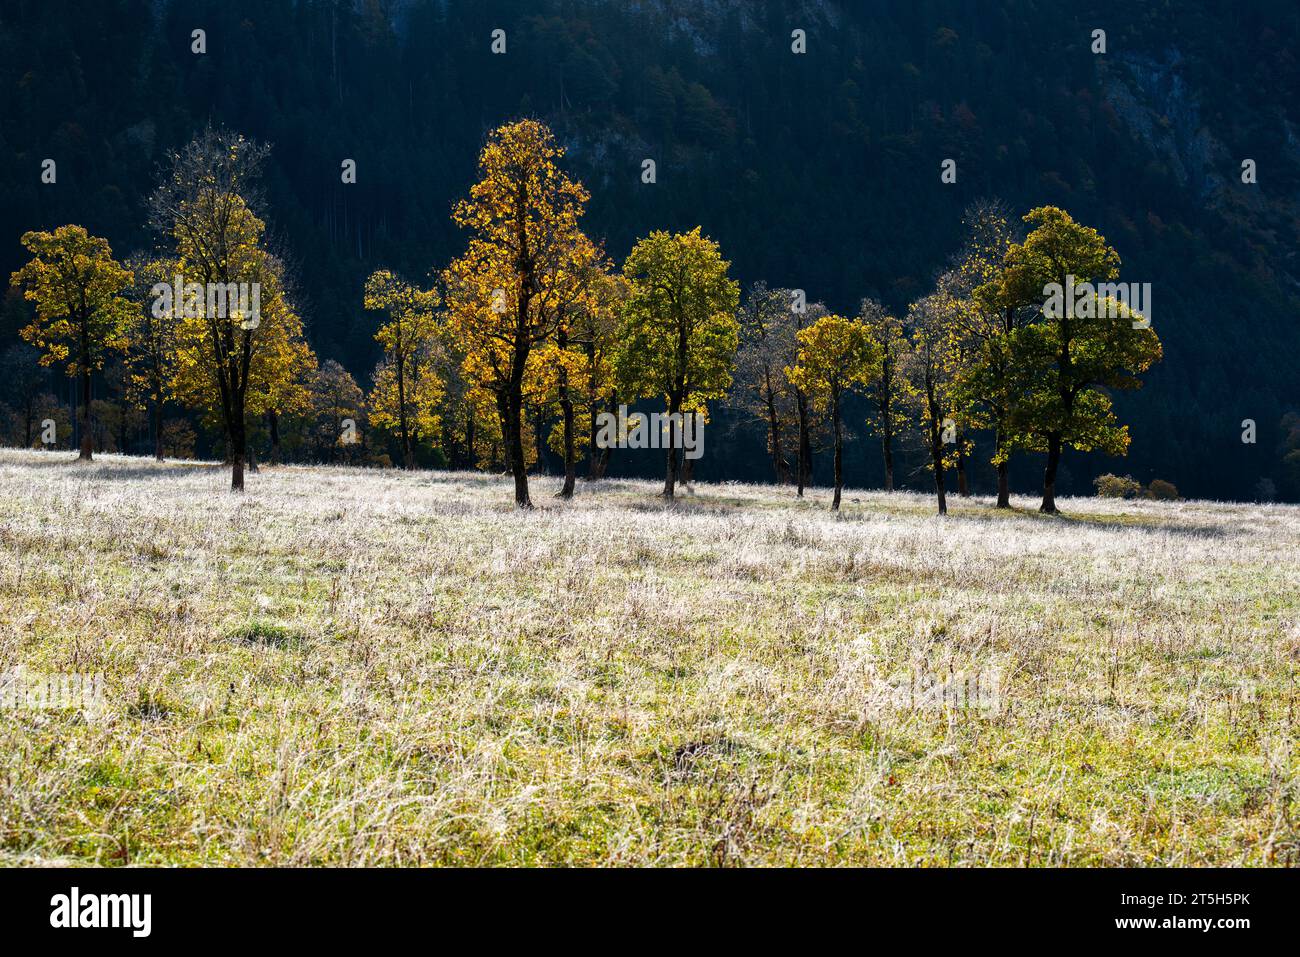 Colorful fall foilage in the Ahorn Boden, Maple Ground, Engtal or Eng Valley,  nature reserve Karwendel Massif, the Alps, Tyrol, Austria, Stock Photo